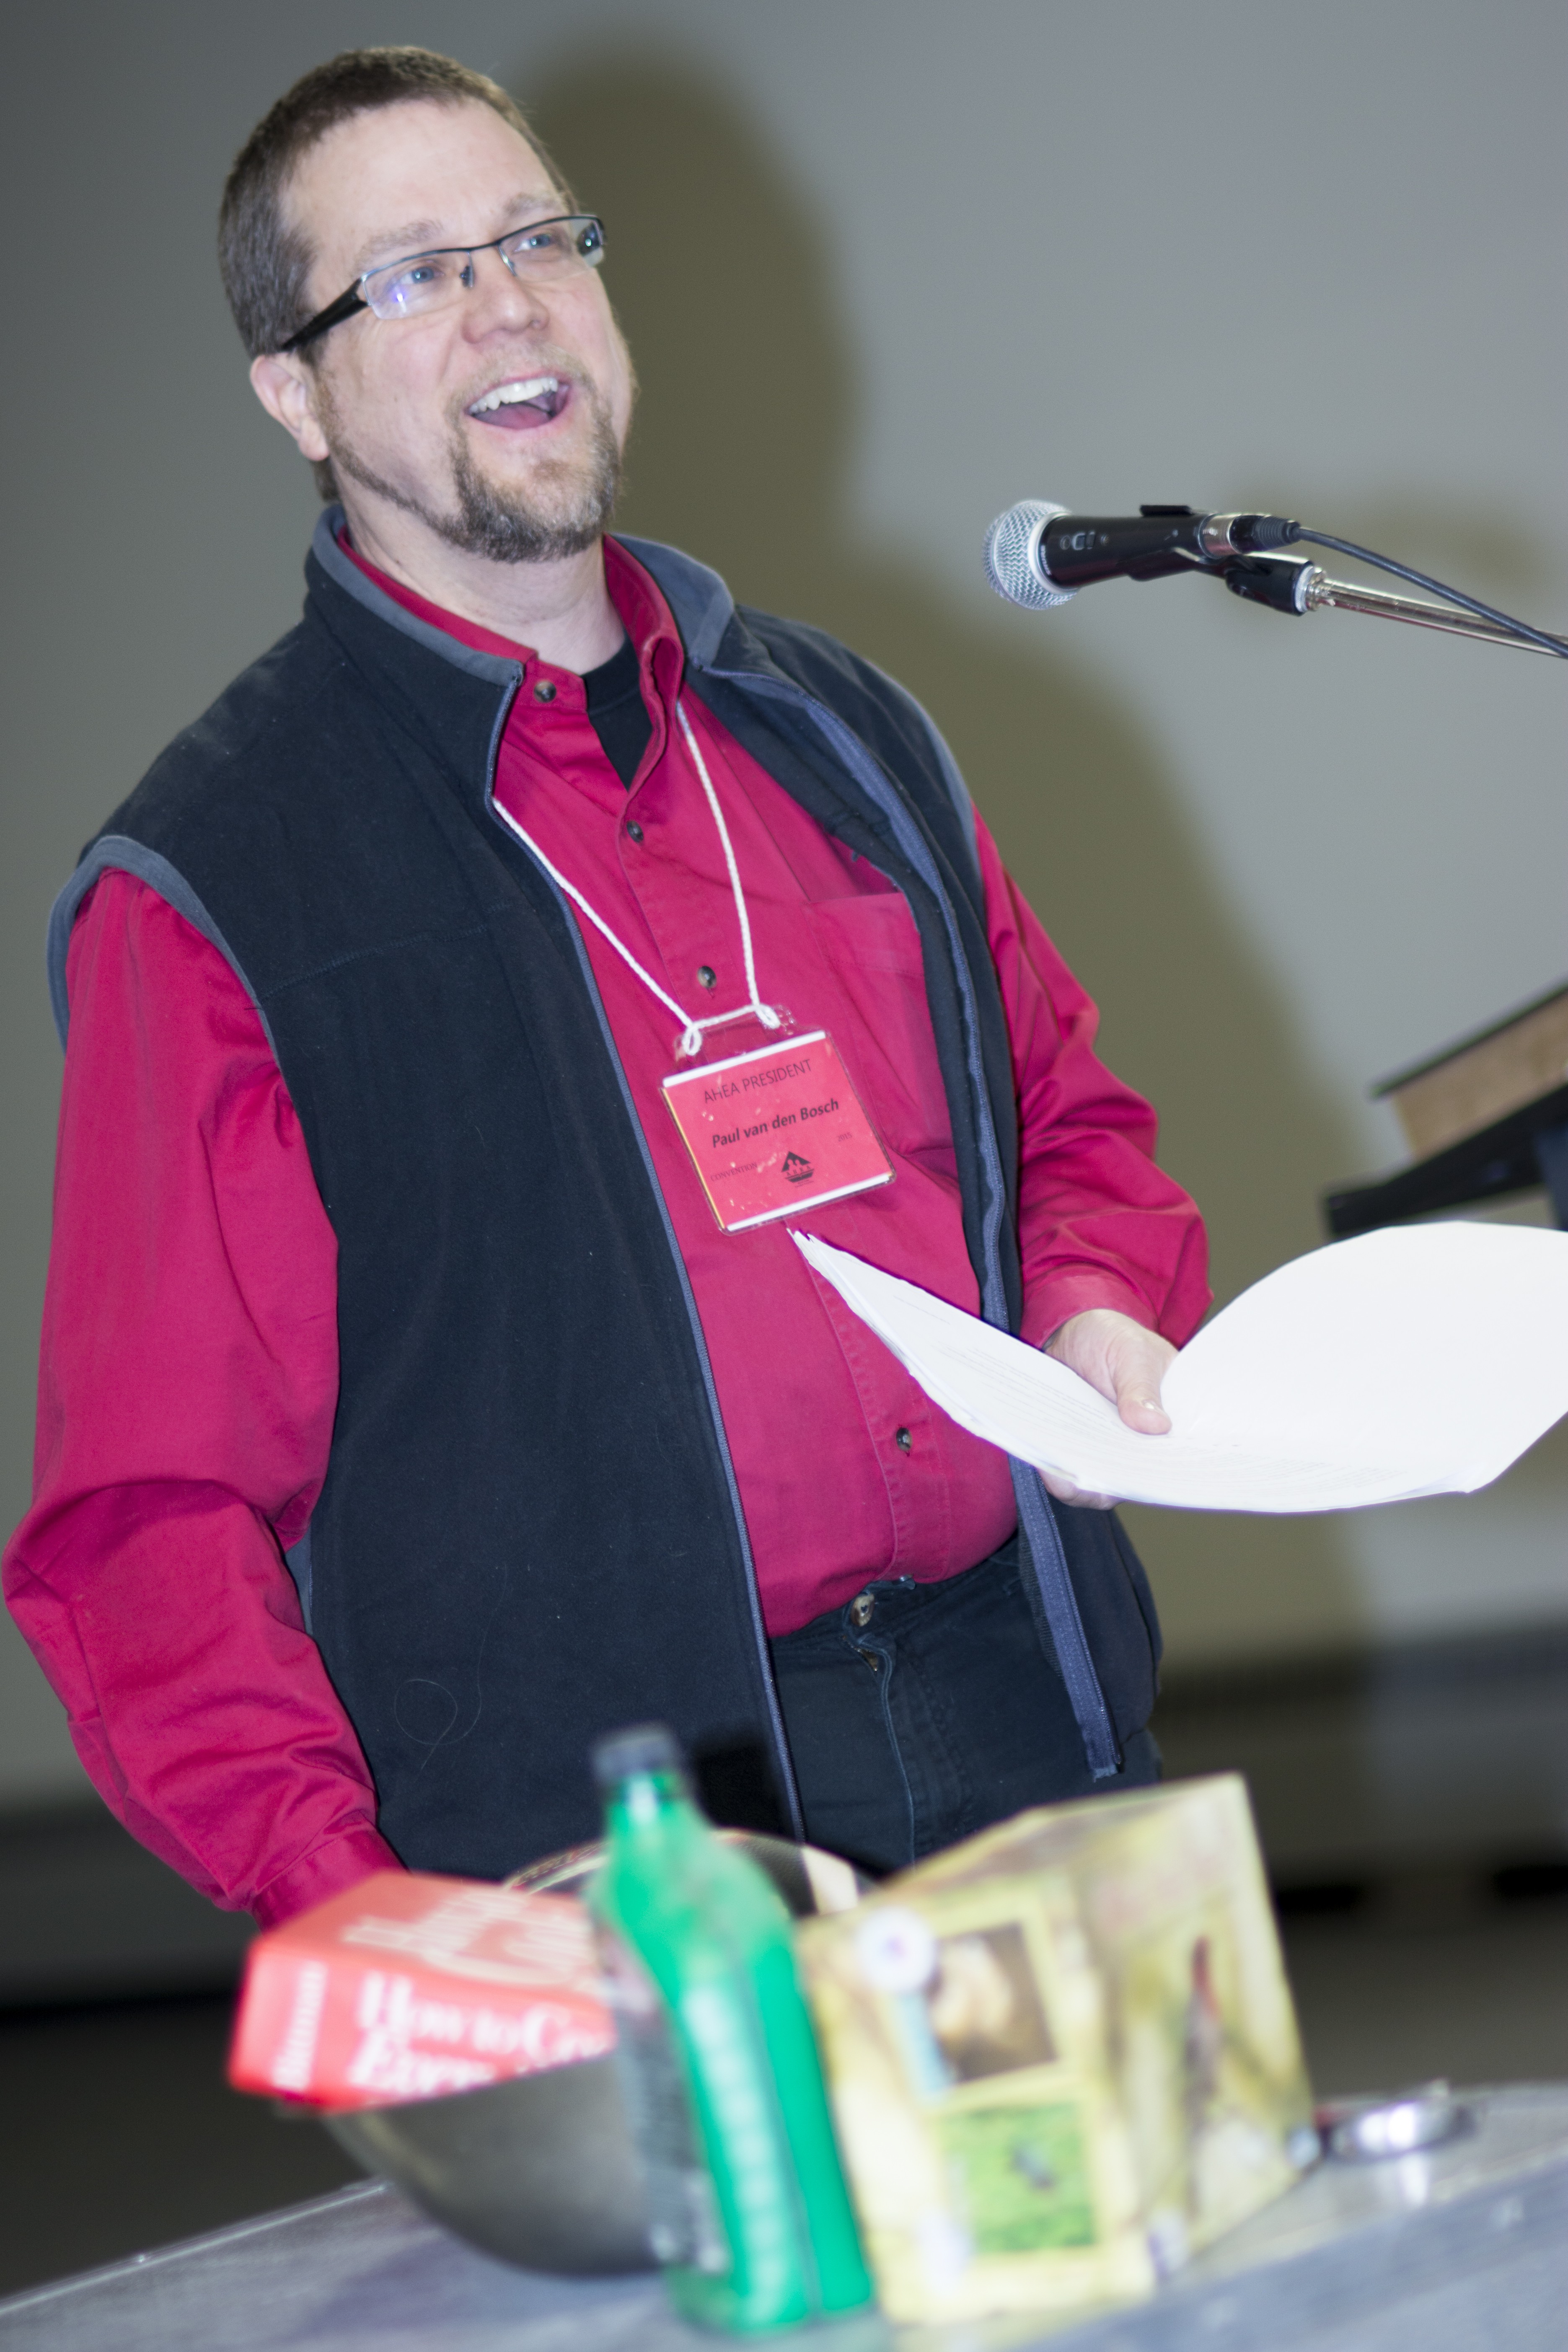 FOSTERING INDIVIDUALITY – The 2015 Alberta Home Education Association (AHEA) Convention took place over the weekend at Westerner Park where president of the AHEA board Paul van den Bosch spoke on the benefits of home education.